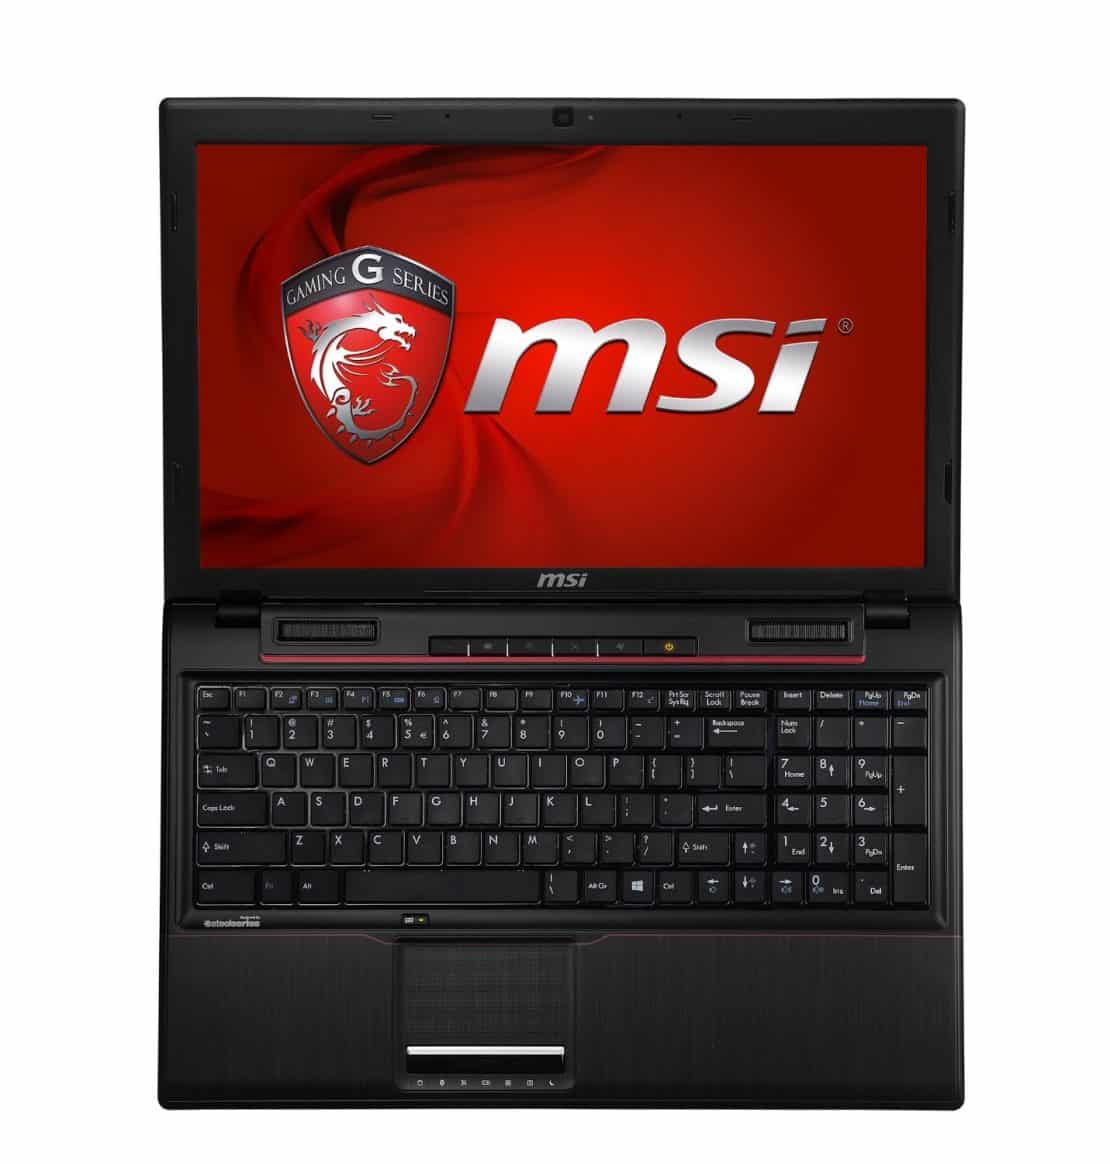 MSI GP60 LEOPARD-010 Gaming Laptop - Budget Gaming Laptop Under 1000 on Amazon - Best Cheap Gaming Laptops for Less Than $1000